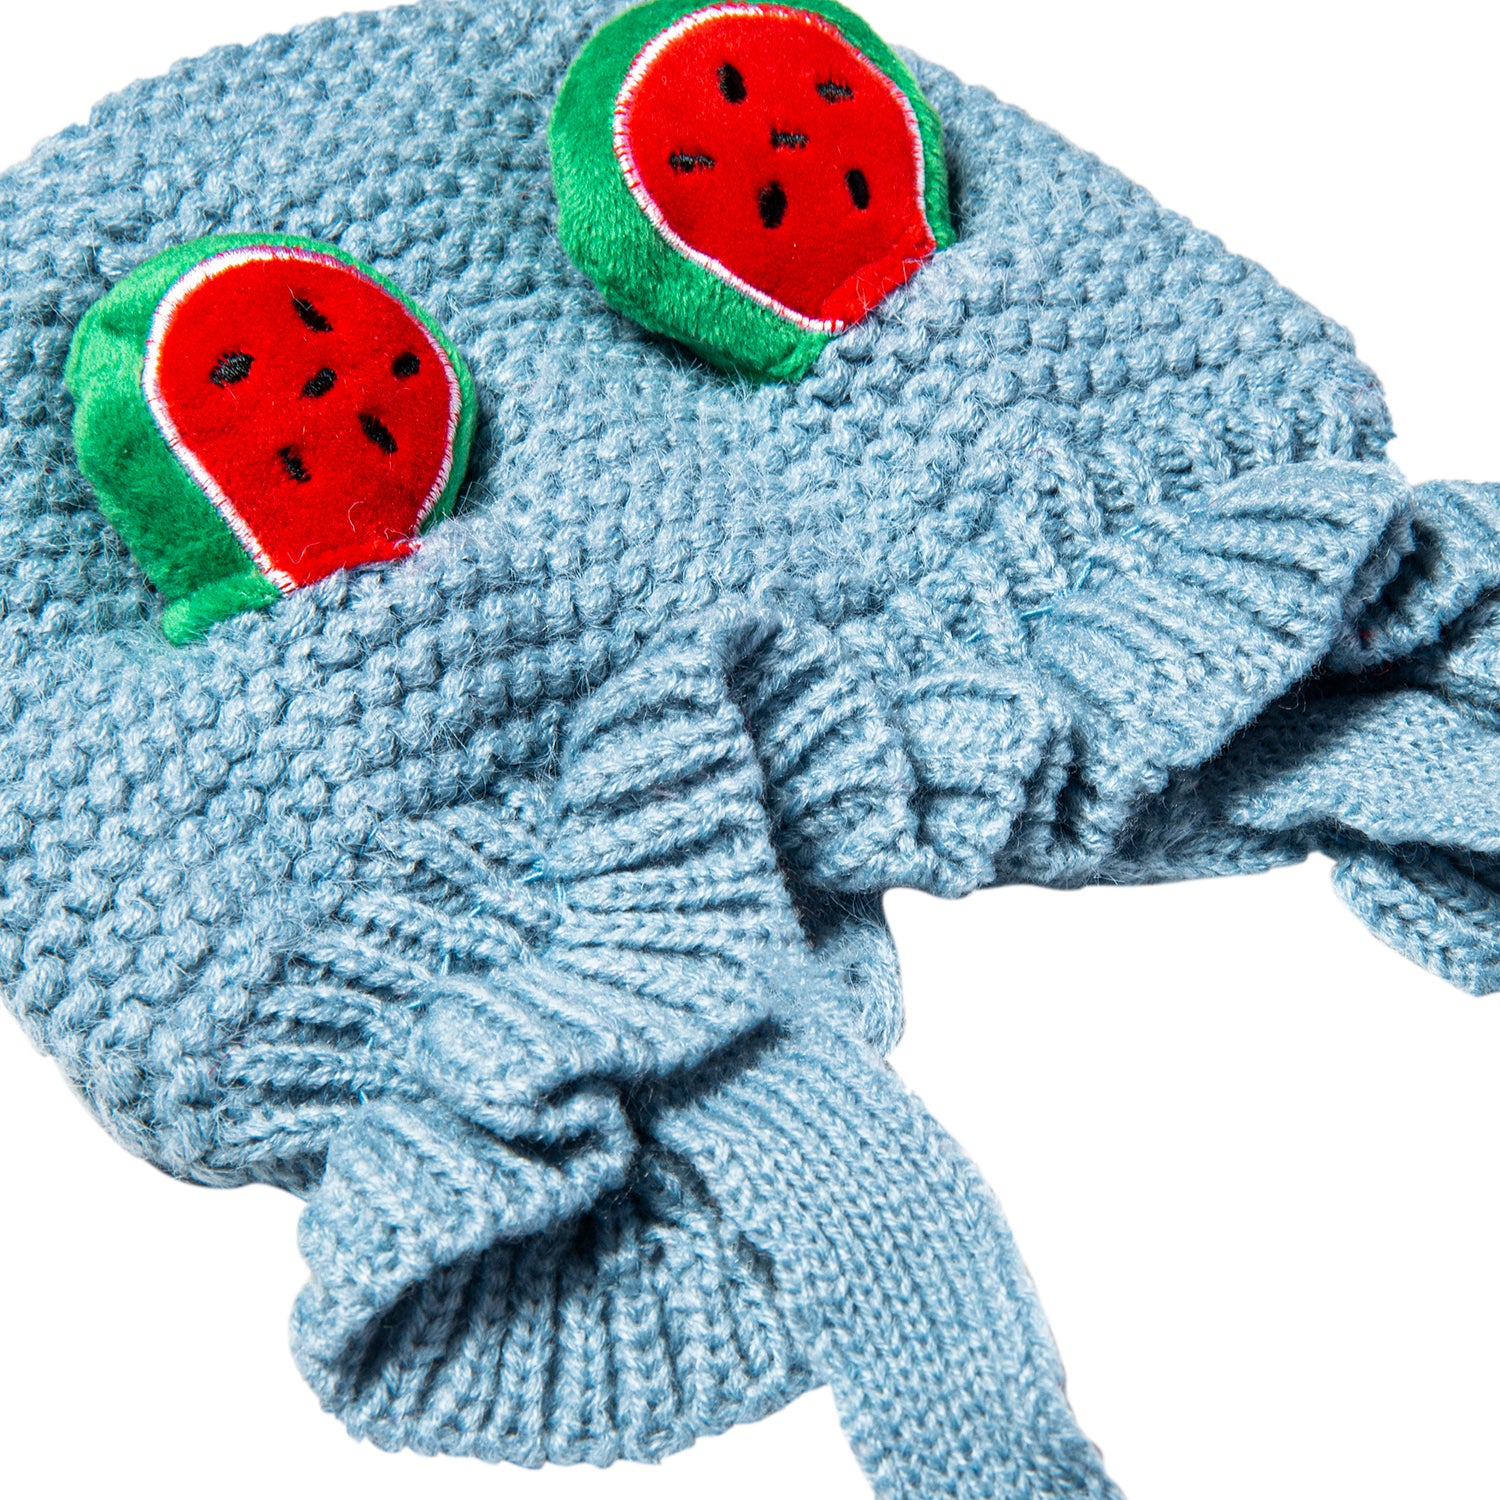 Knit Woollen Cap With Tie Knot For Ear Cover Watermelon Blue - Baby Moo